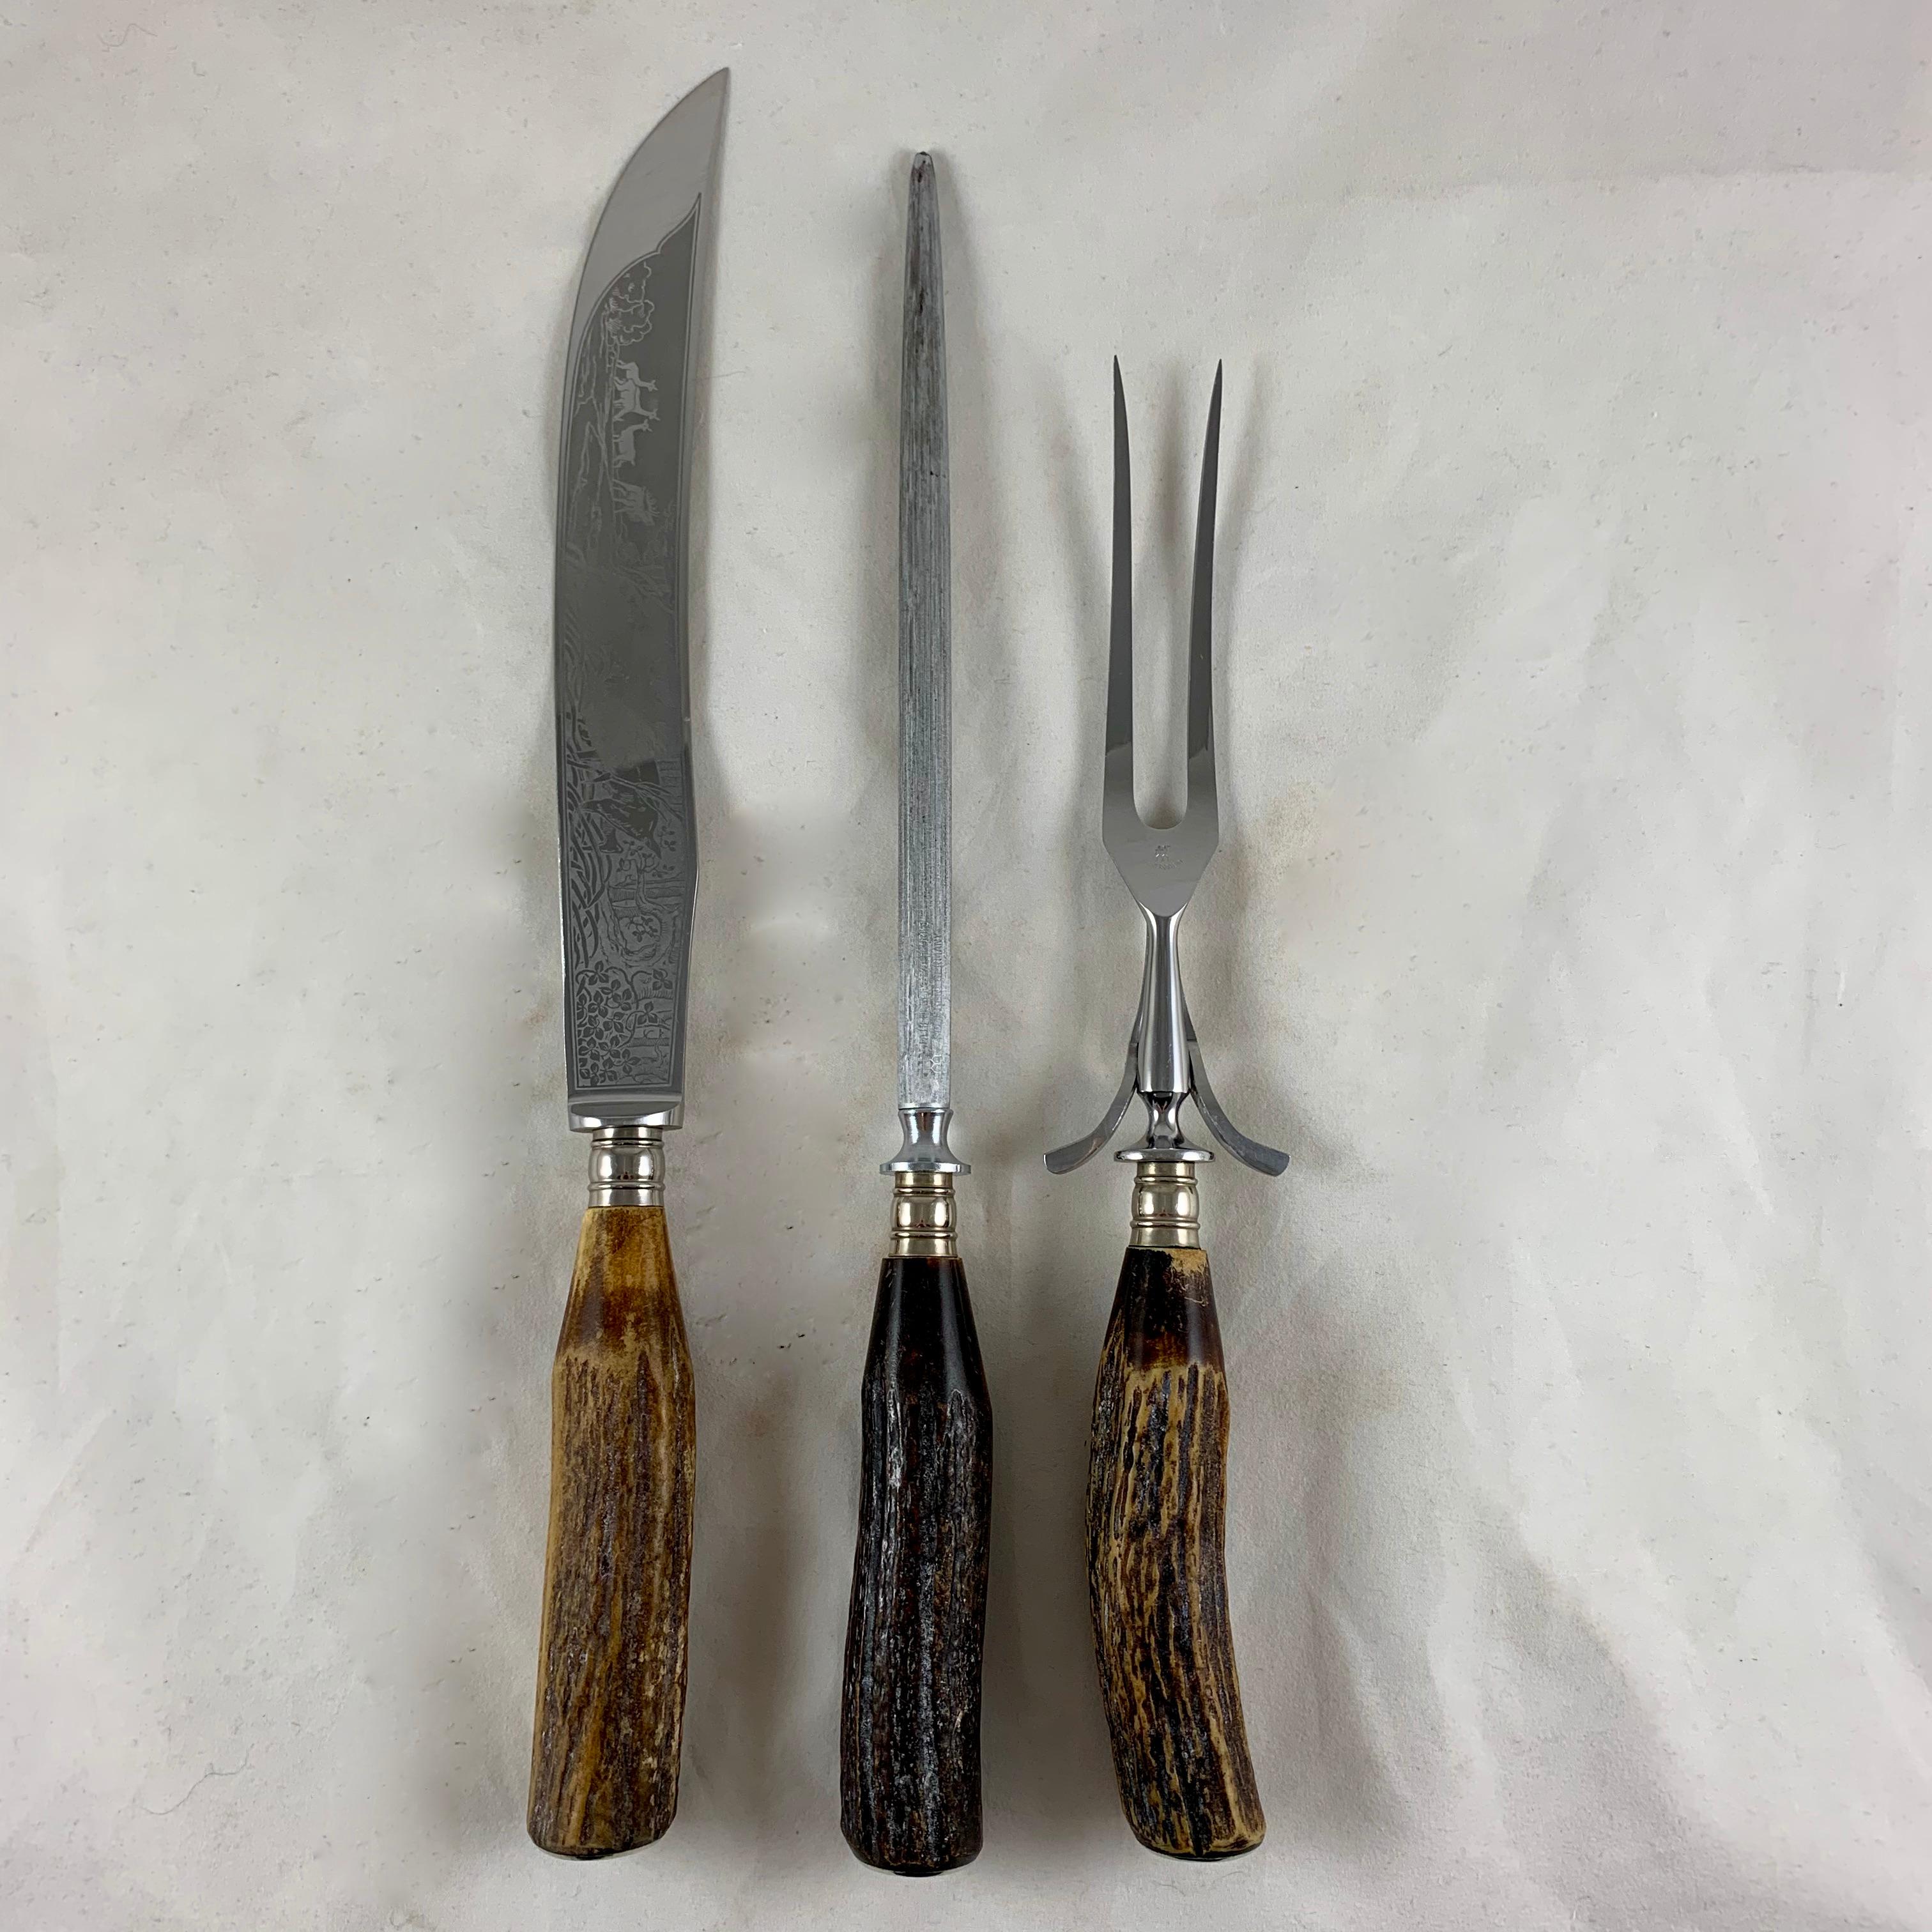 A vintage boxed carving set from Henkels Zwillingswerk, circa 1960s-1970s.
A carving knife, fork, and sharpening steel made with naturally shed Roe Buck Stag Horn handles and Friodur Soligen steel. The blade is etched with a scene showing a